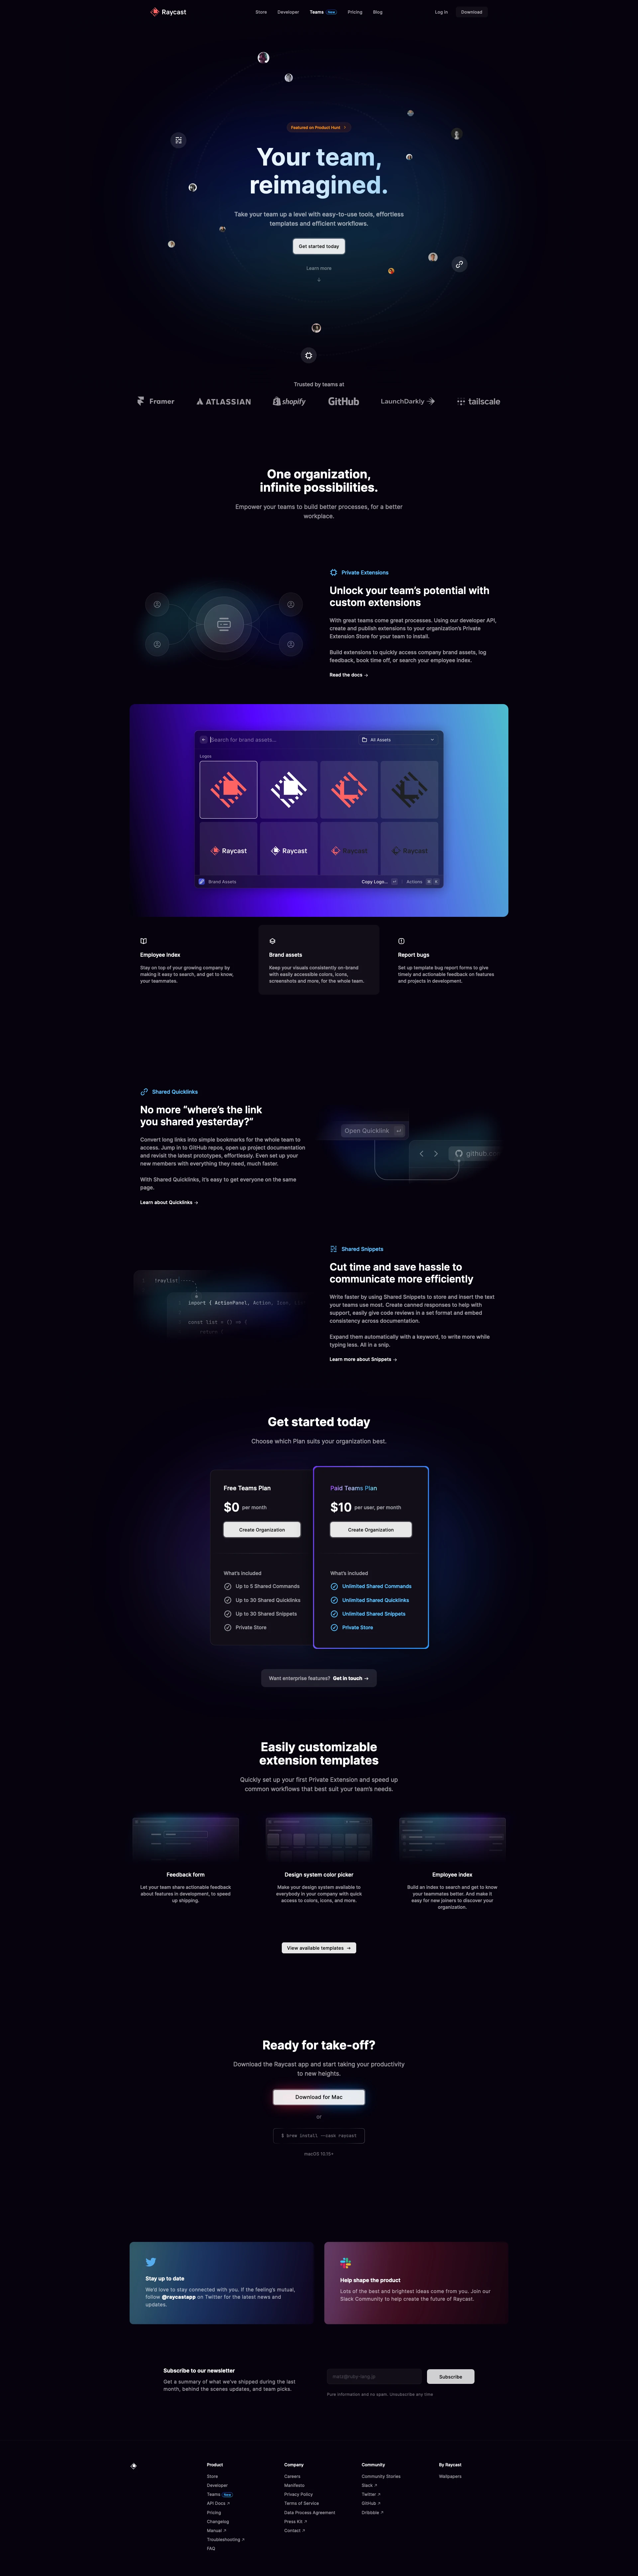 Raycast Landing Page Example: Supercharged productivity. Raycast is a blazingly fast, totally extendable launcher. It lets you complete tasks, calculate, share common links, and much more.